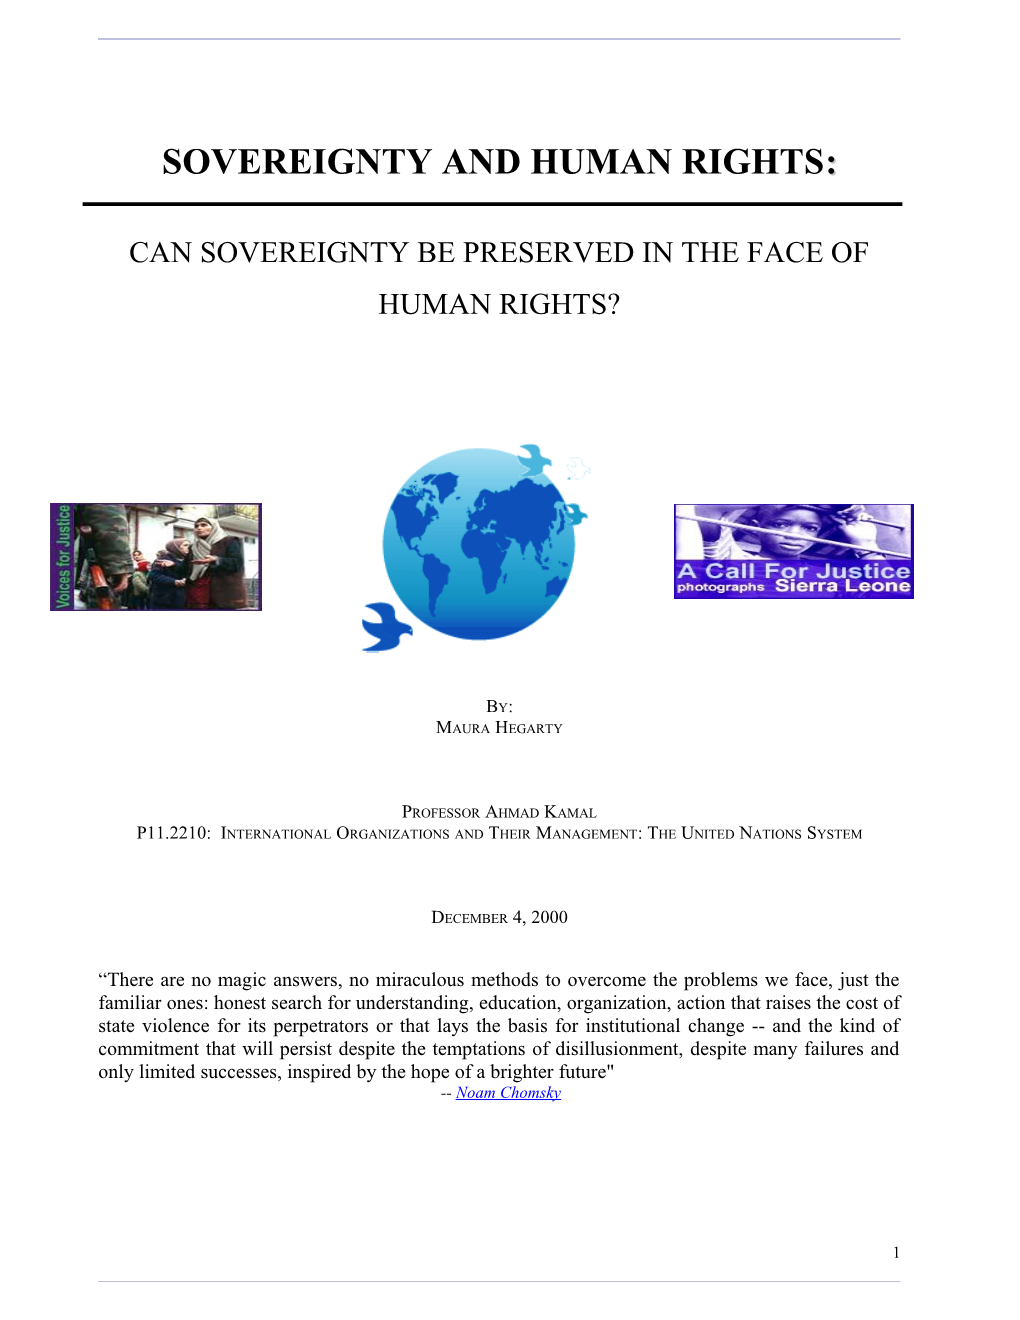 Sovereignty and Human Rights